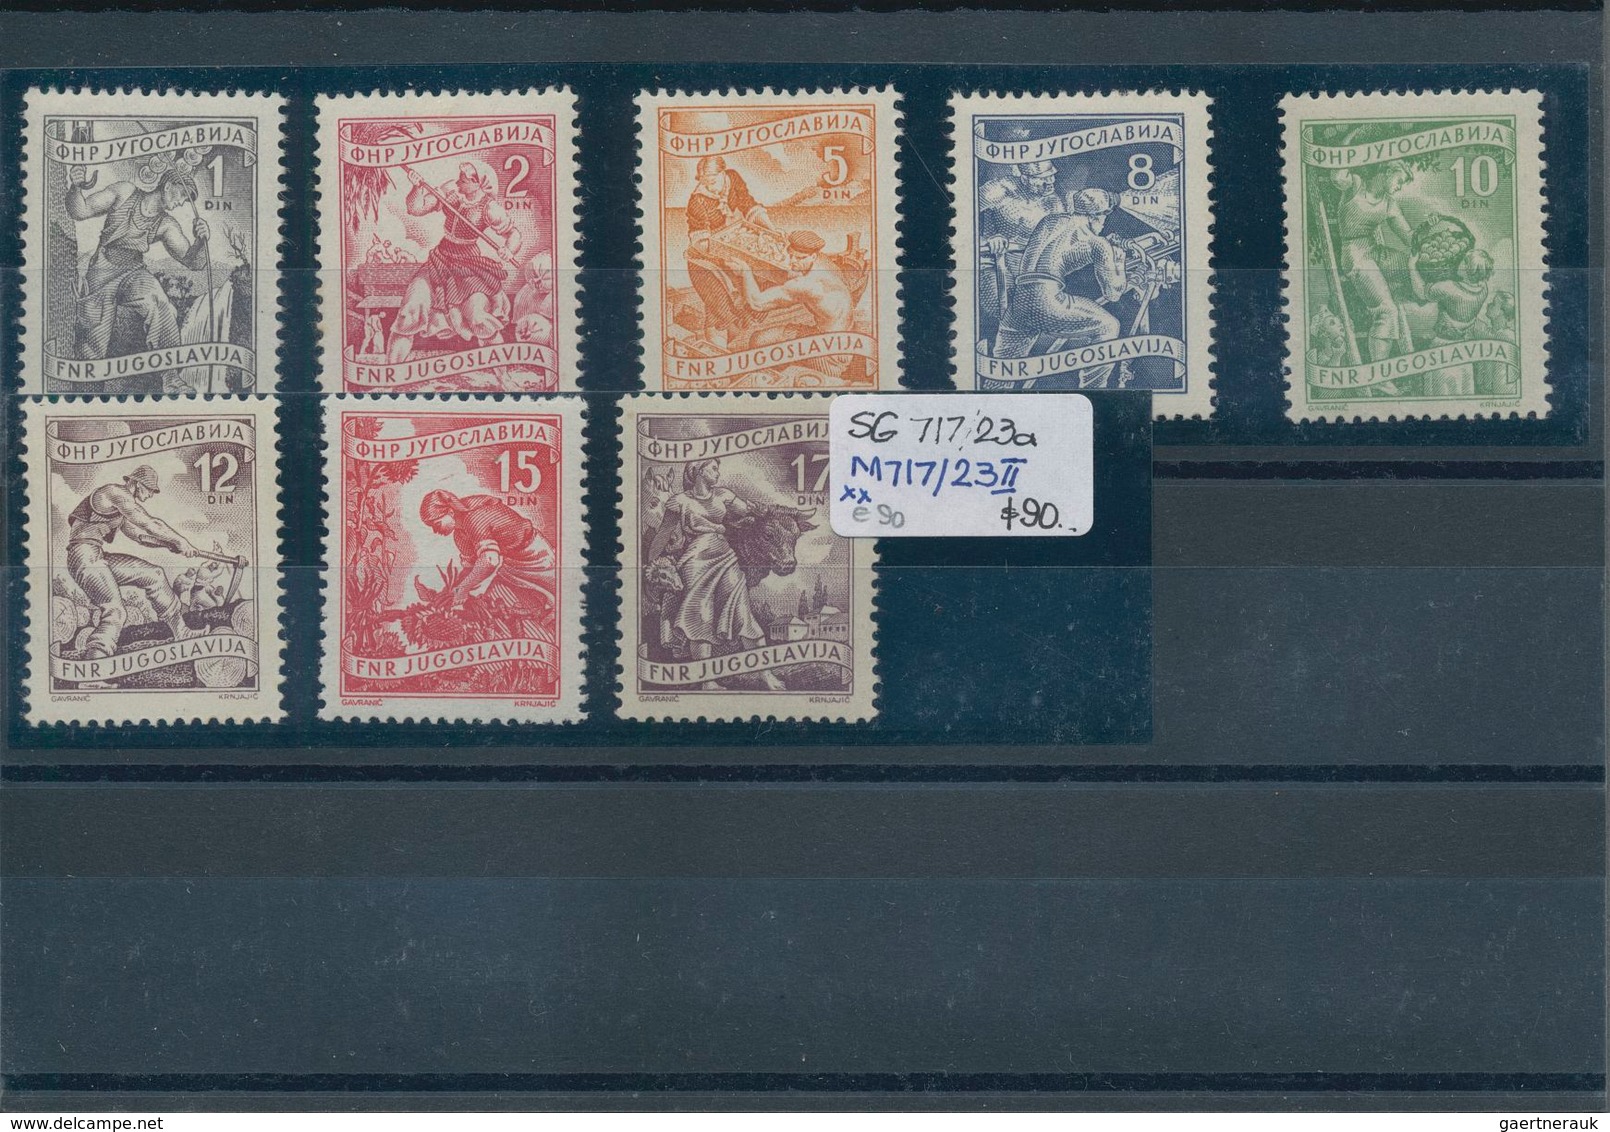 Jugoslawien: 1937/1970 (ca.), mainly u/m holding on stockcards in a small binder, almost exclusively